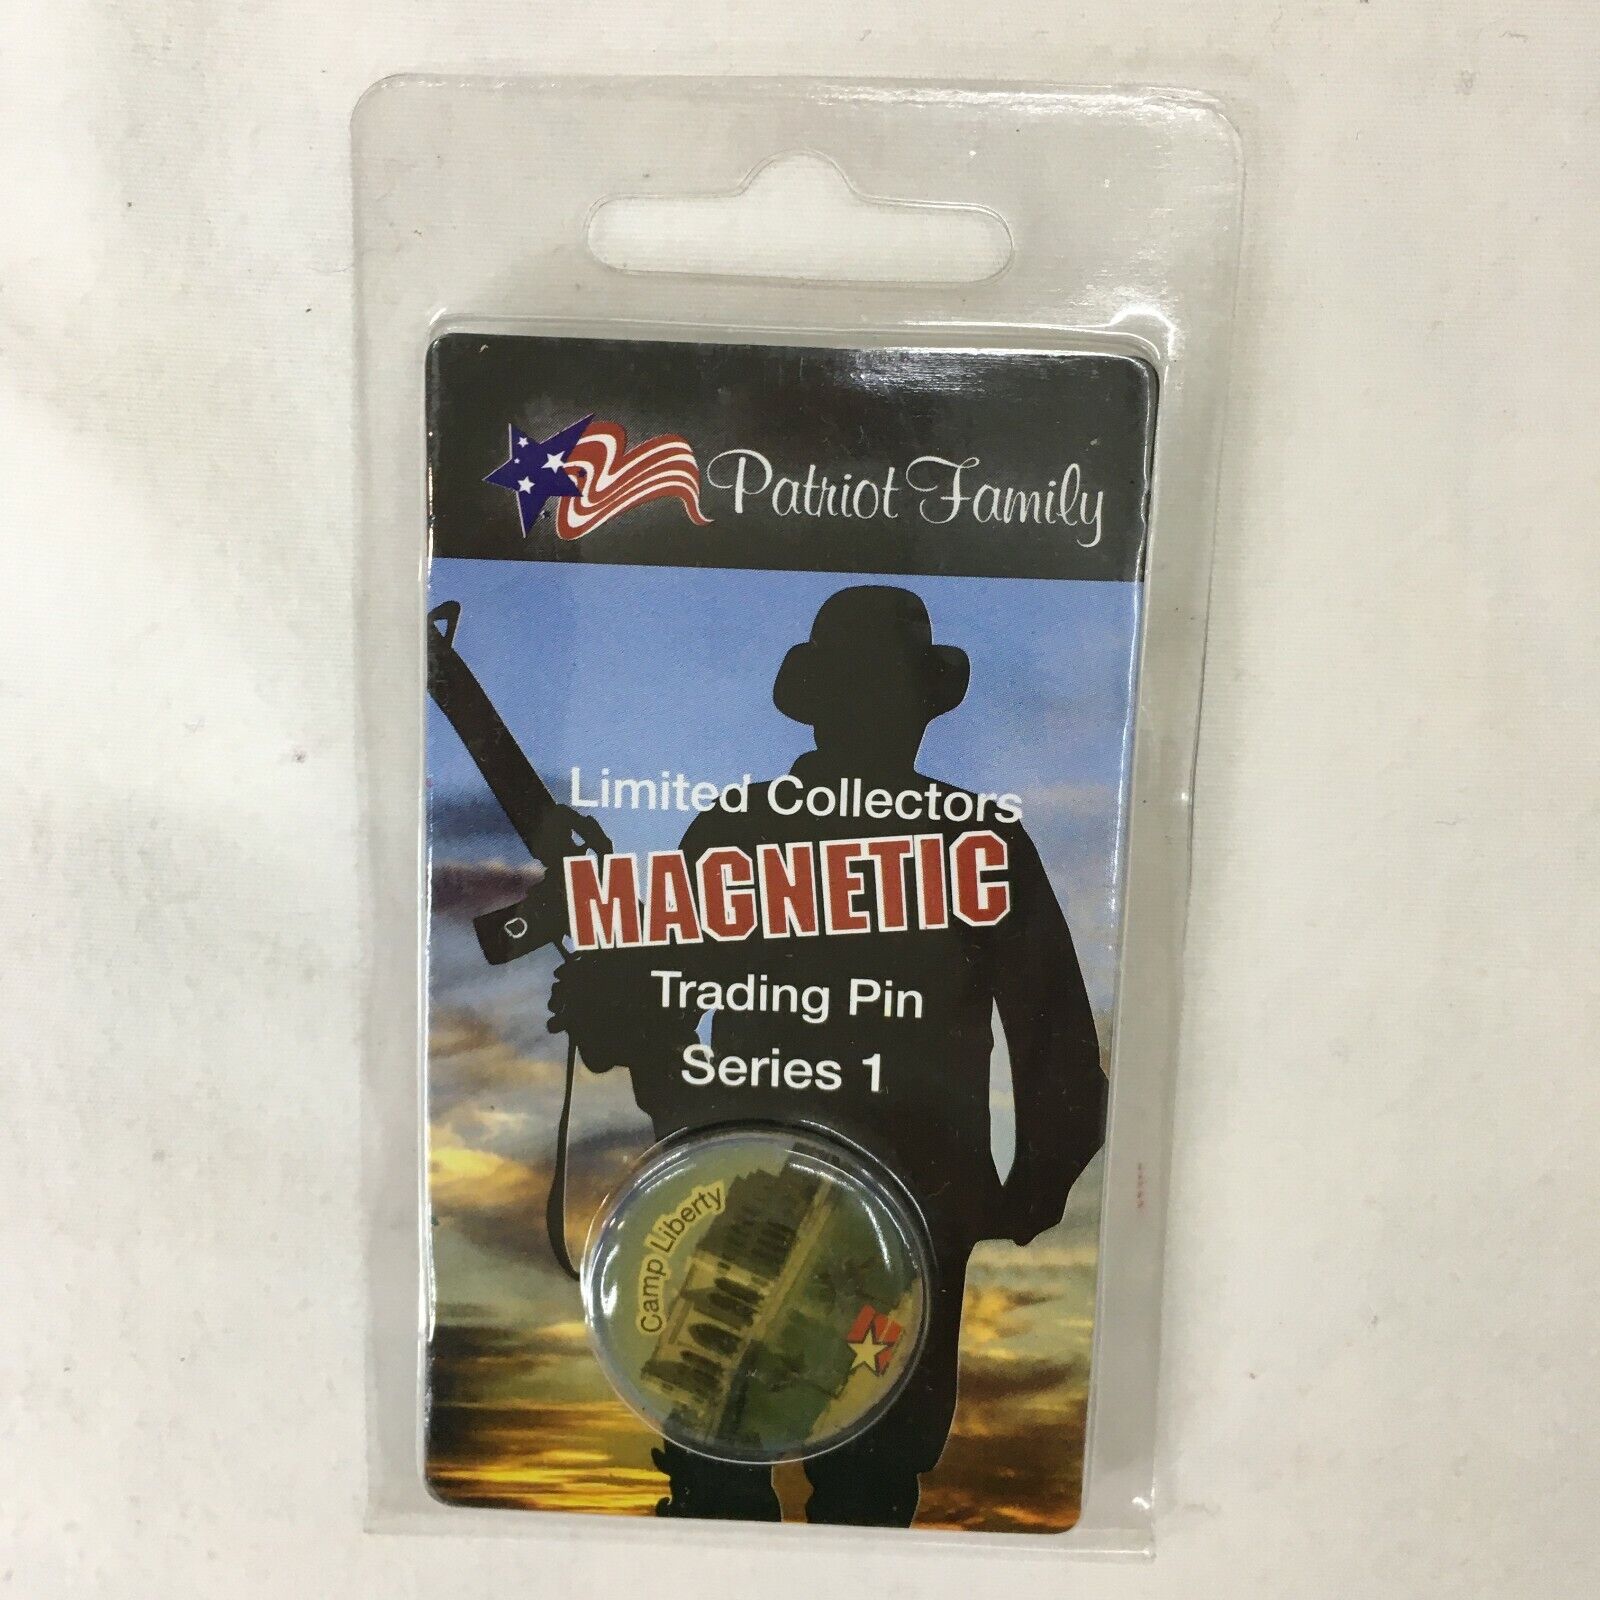 Magnetic Trading Pin, Patriot Family Limited Collectors Iraq, 3 Pin Lot Series 1 Без бренда - фотография #3